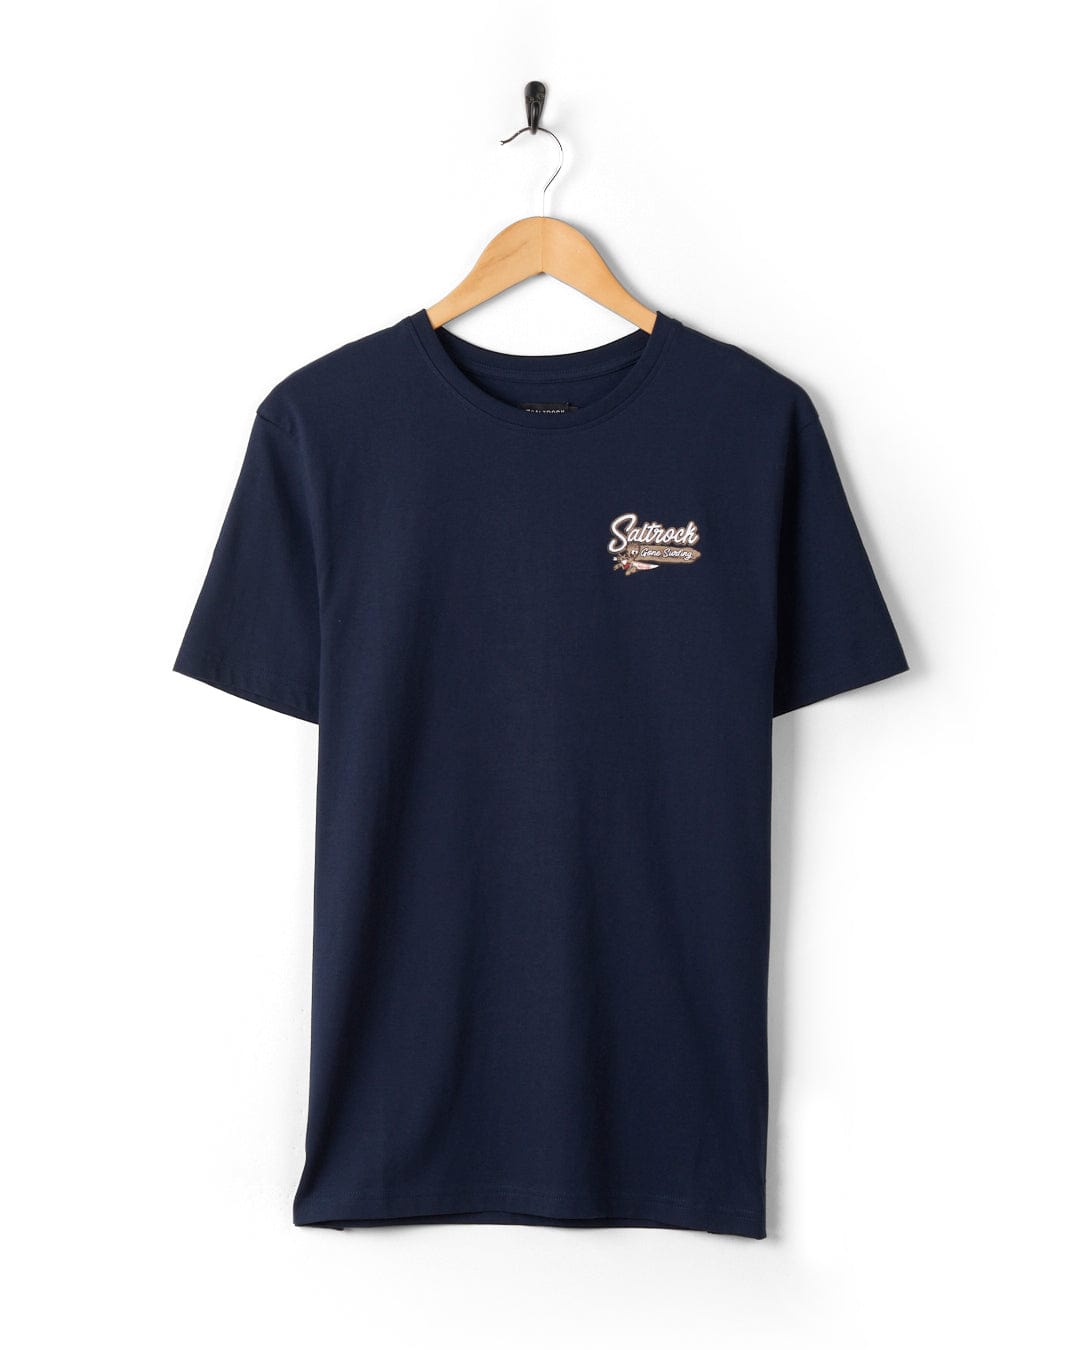 A navy t-shirt featuring the Saltrock branding logo, with a peached soft hand feel.